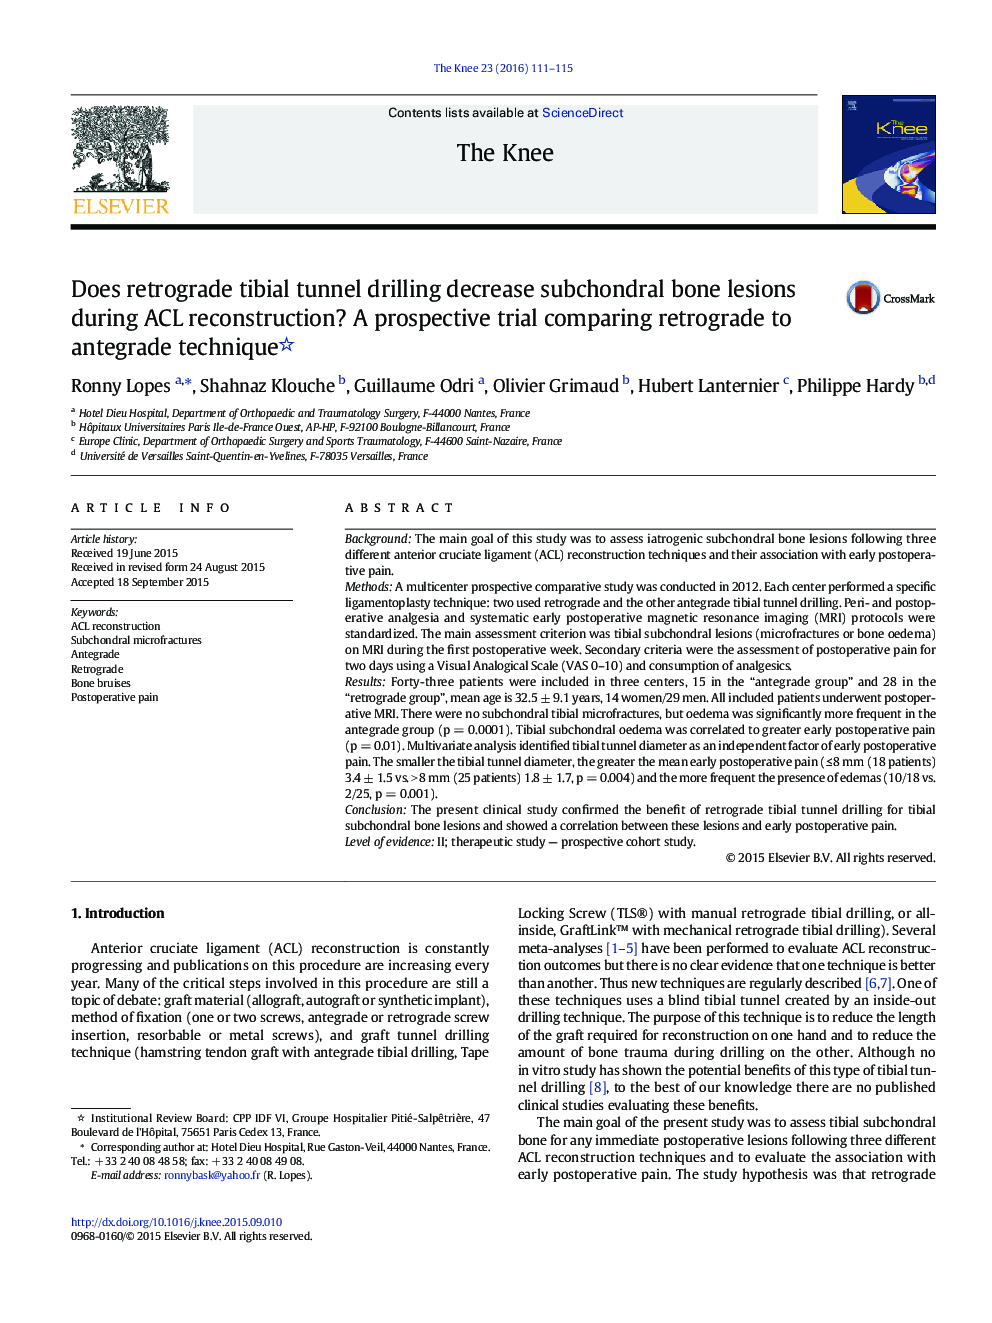 Does retrograde tibial tunnel drilling decrease subchondral bone lesions during ACL reconstruction? A prospective trial comparing retrograde to antegrade technique 